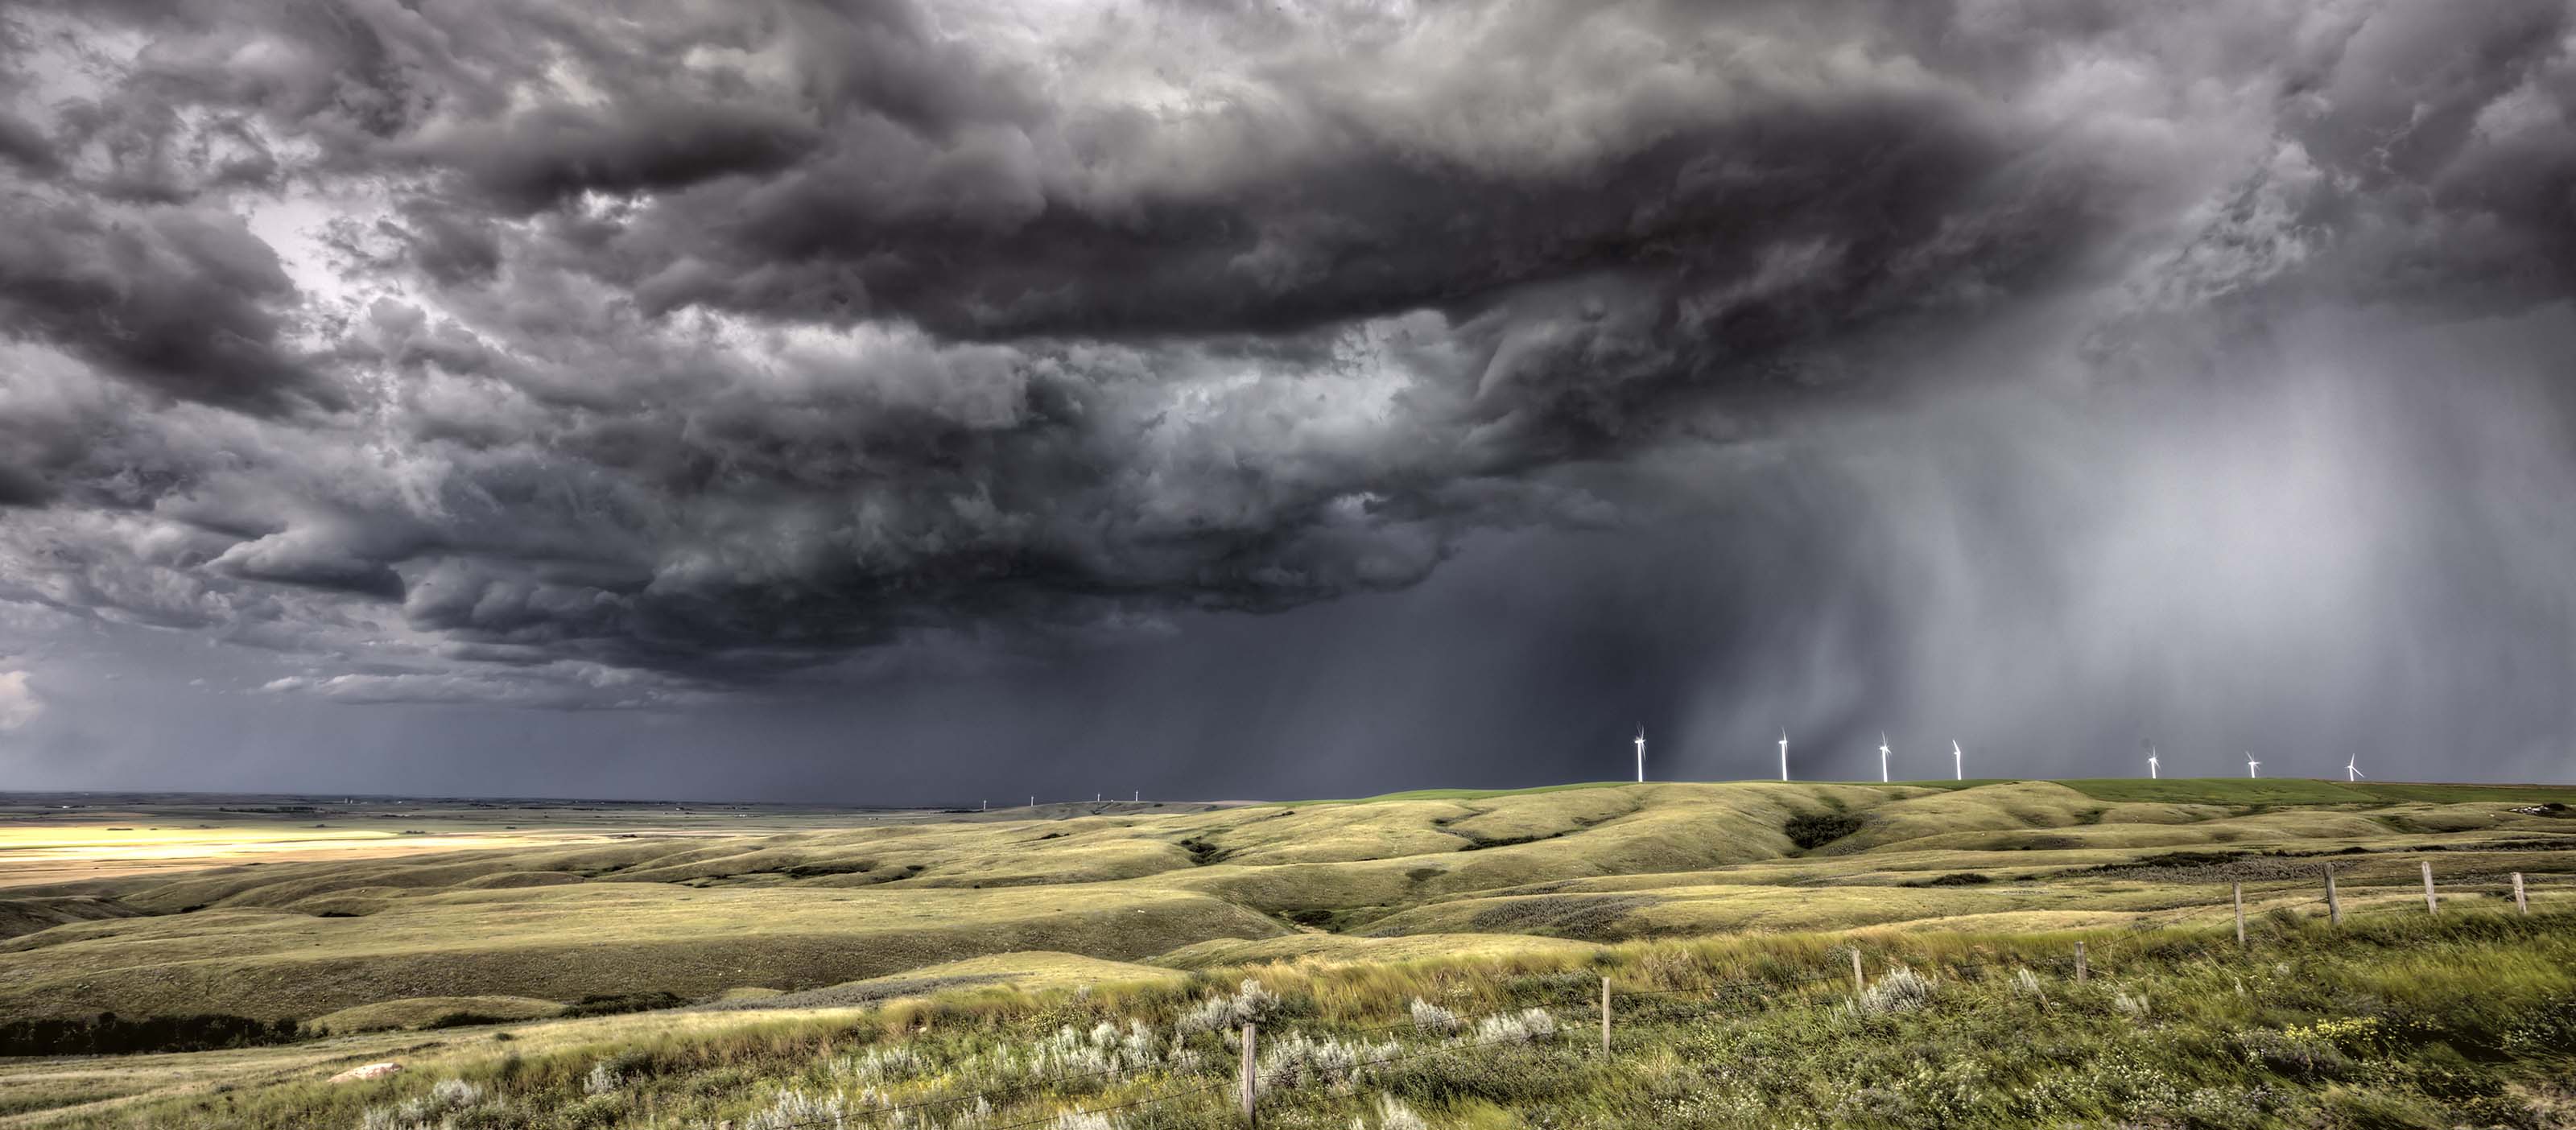 Software to help utilities in extreme weather | GE Digital